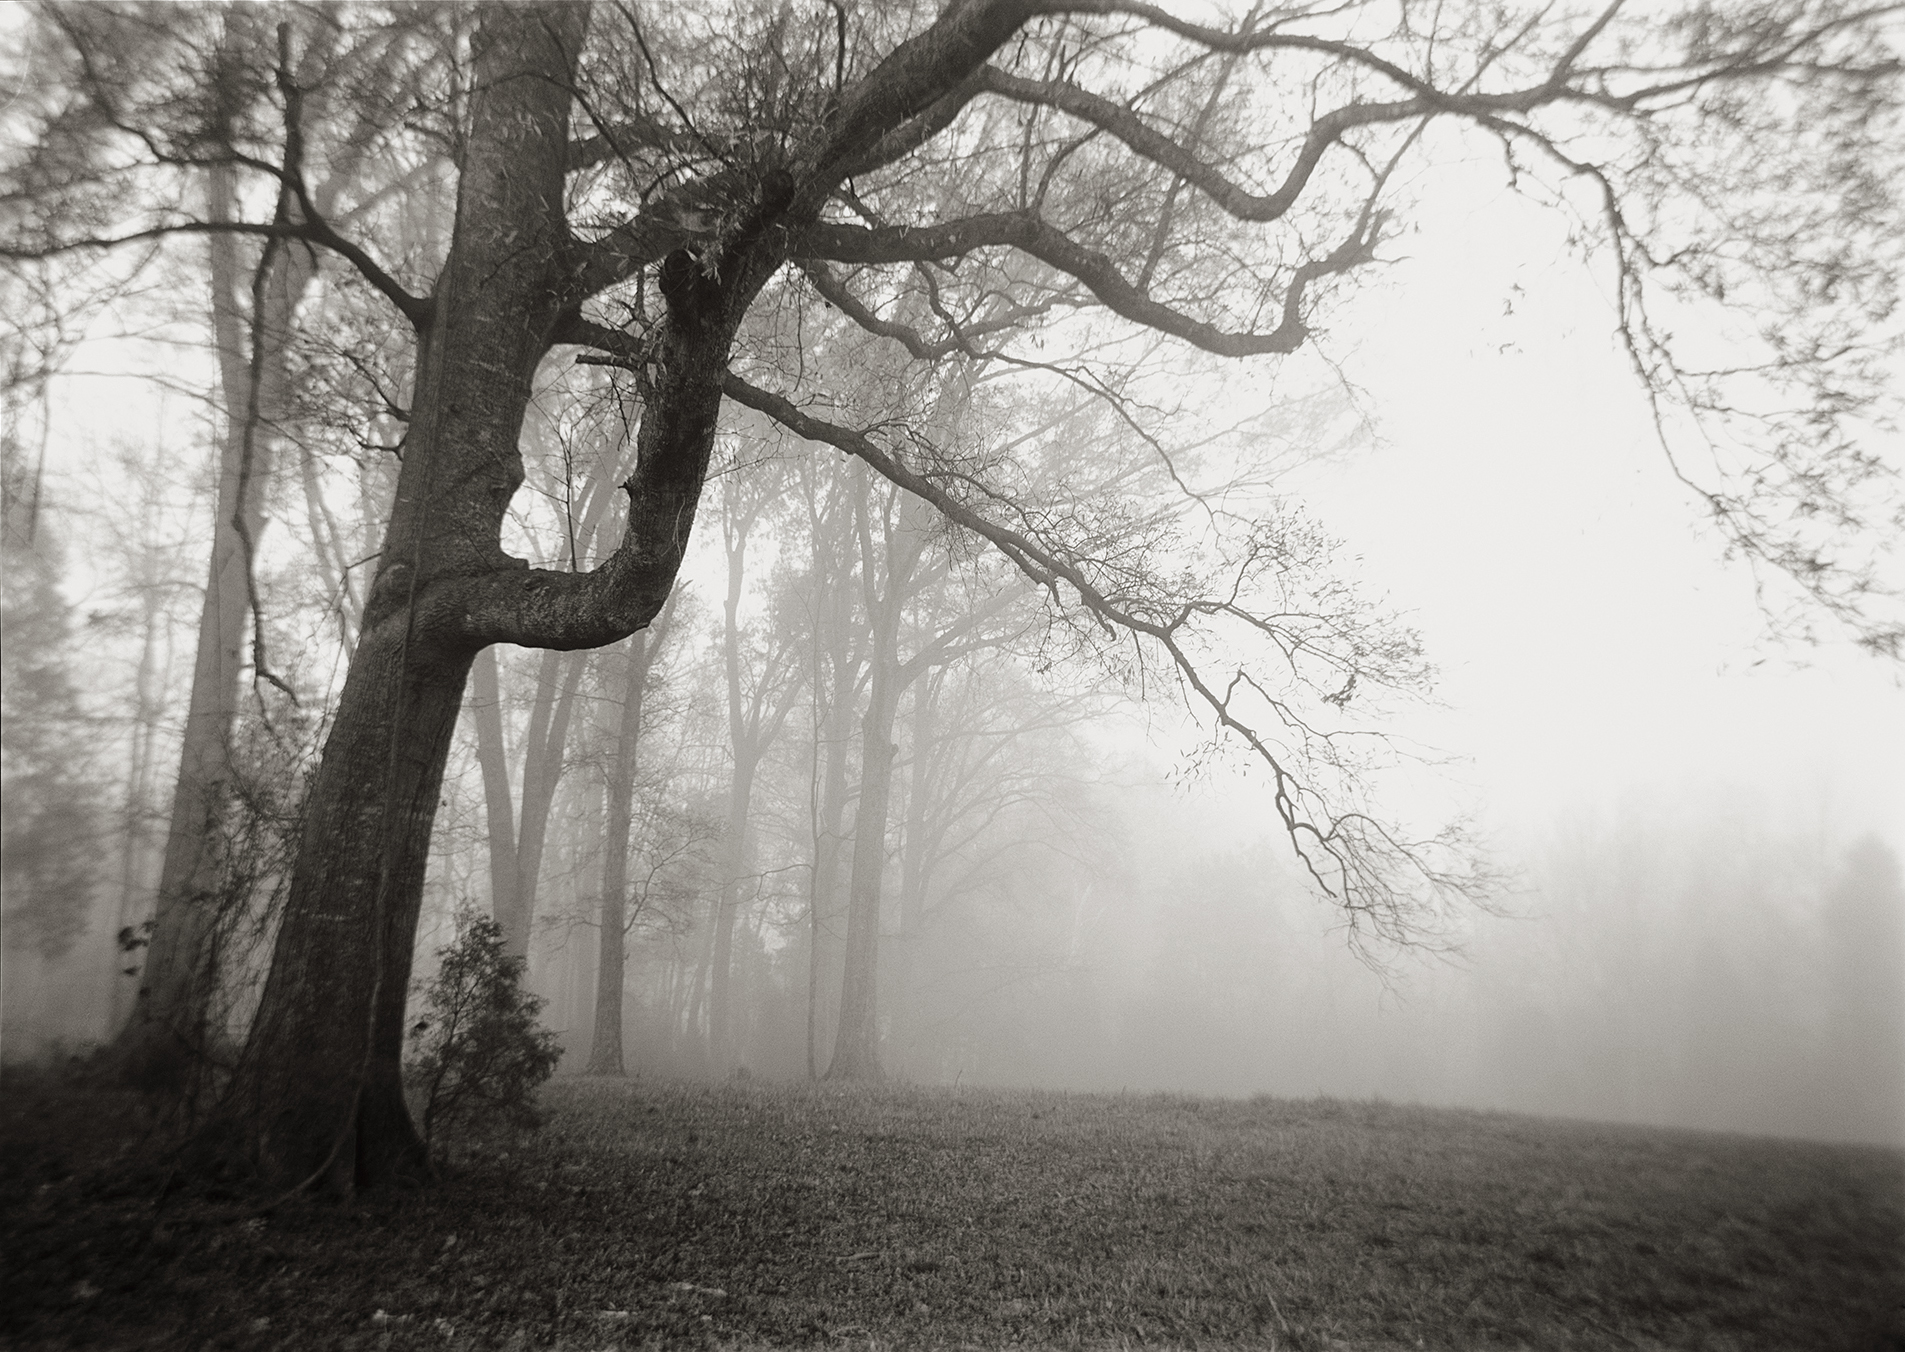  BRANCHES IN FOG, 2007 